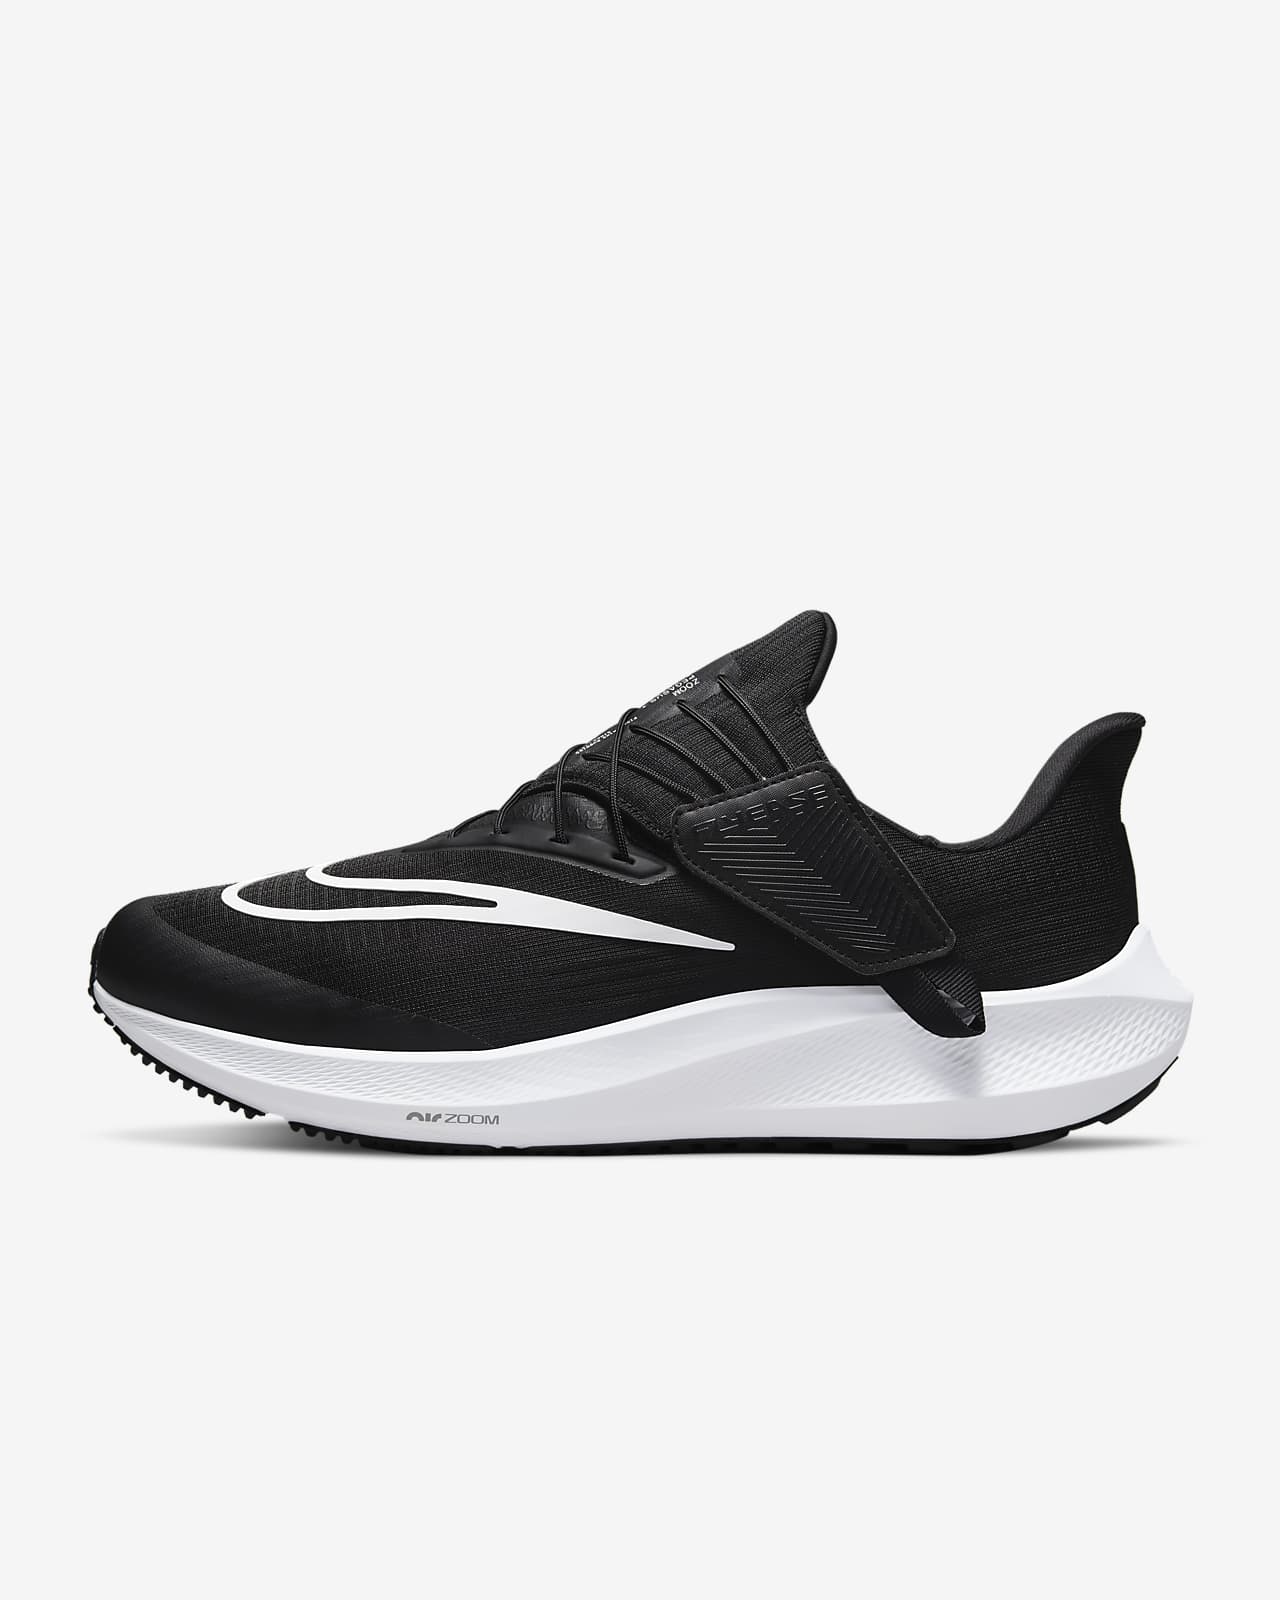 nike off white easy run top and bottom